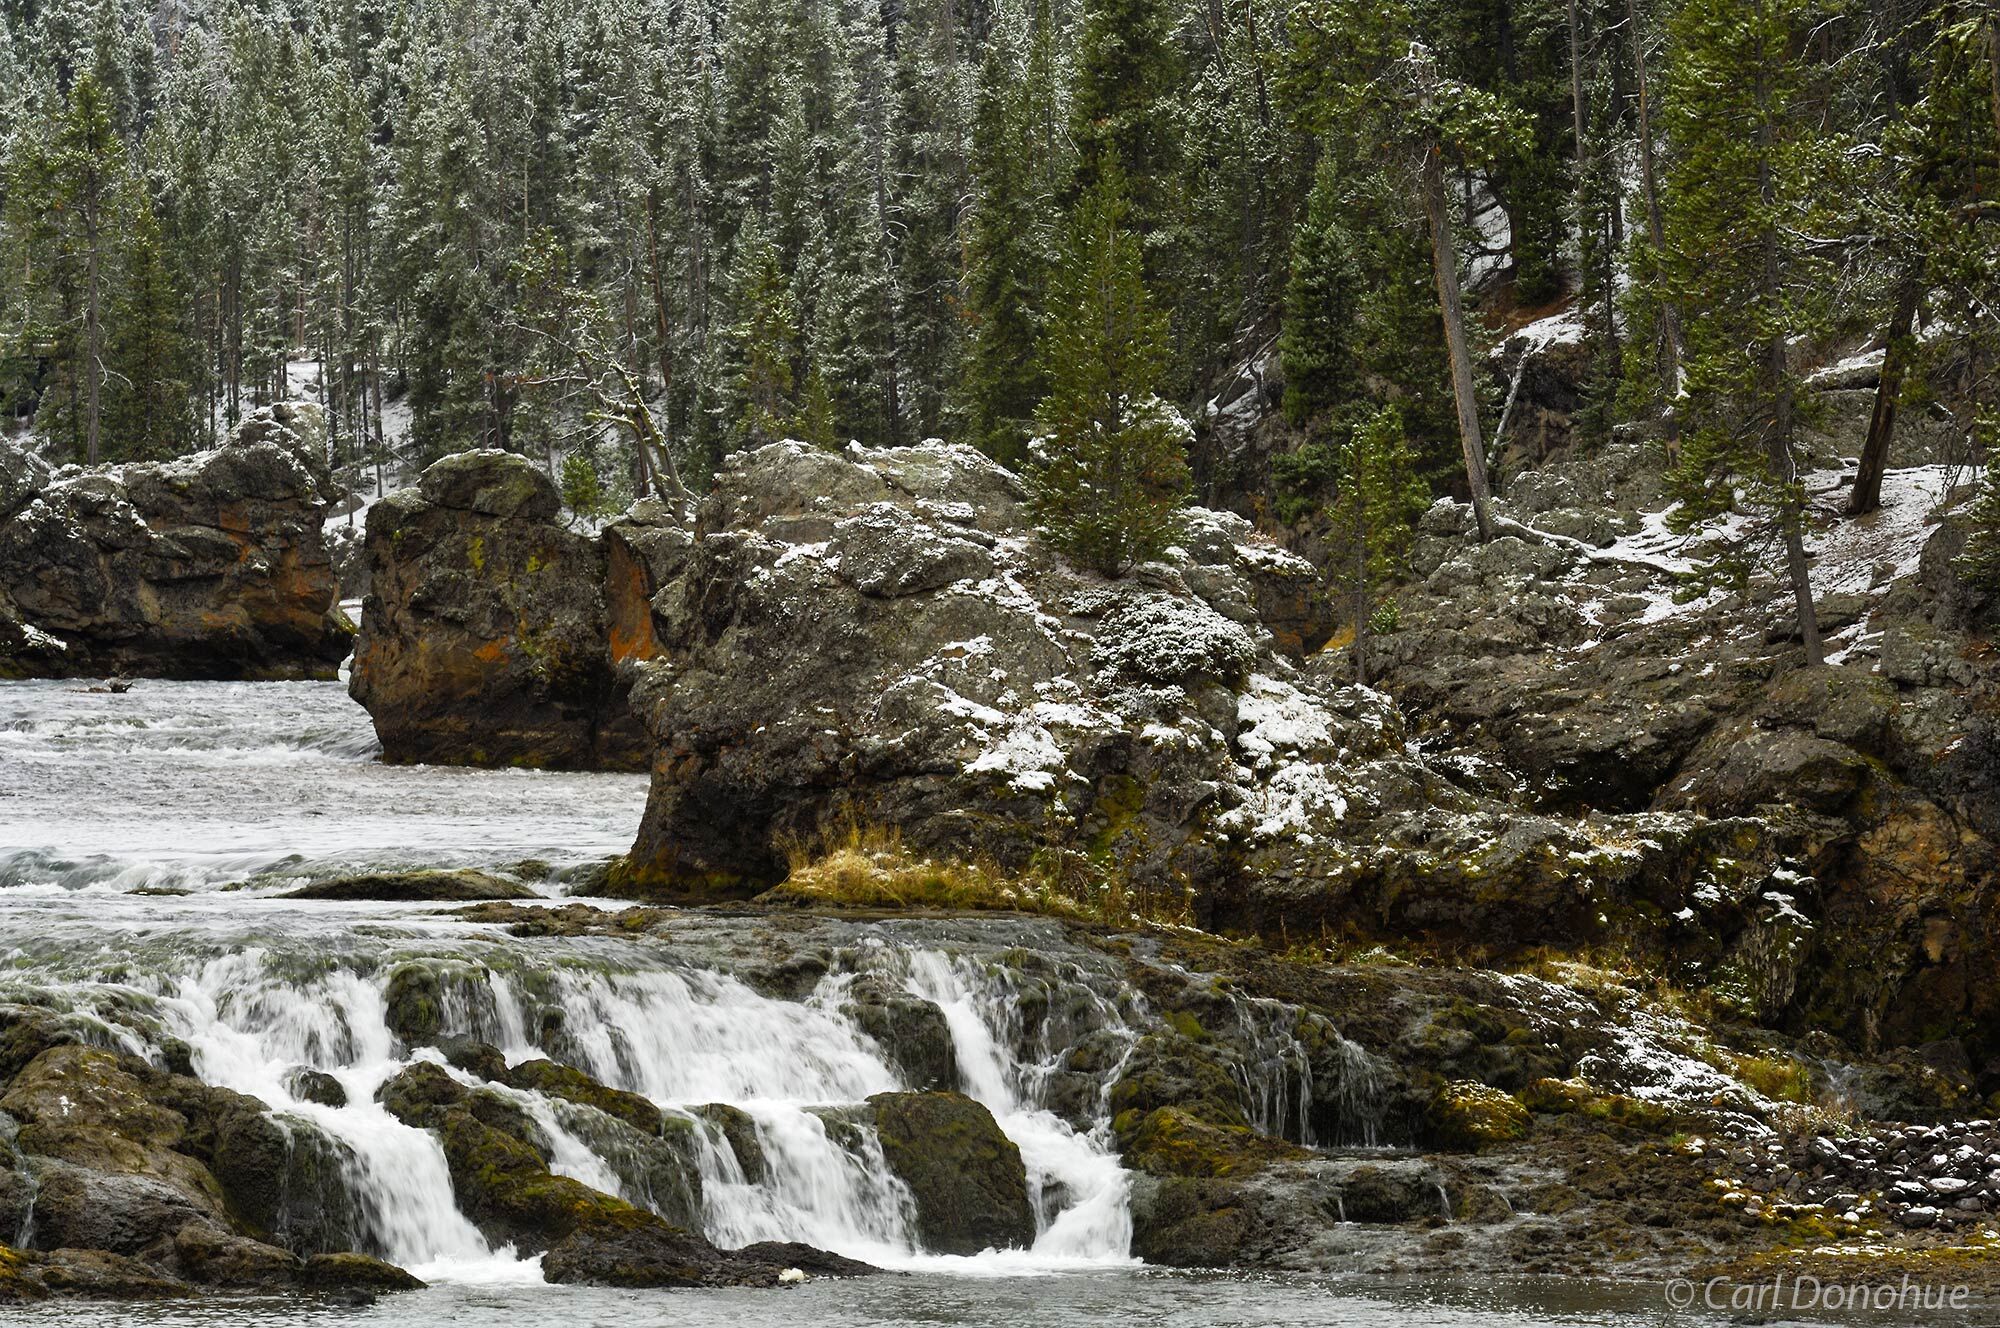 Fresh snow at the Upper Falls in Yellowstone National Park's canyon, Wyoming.